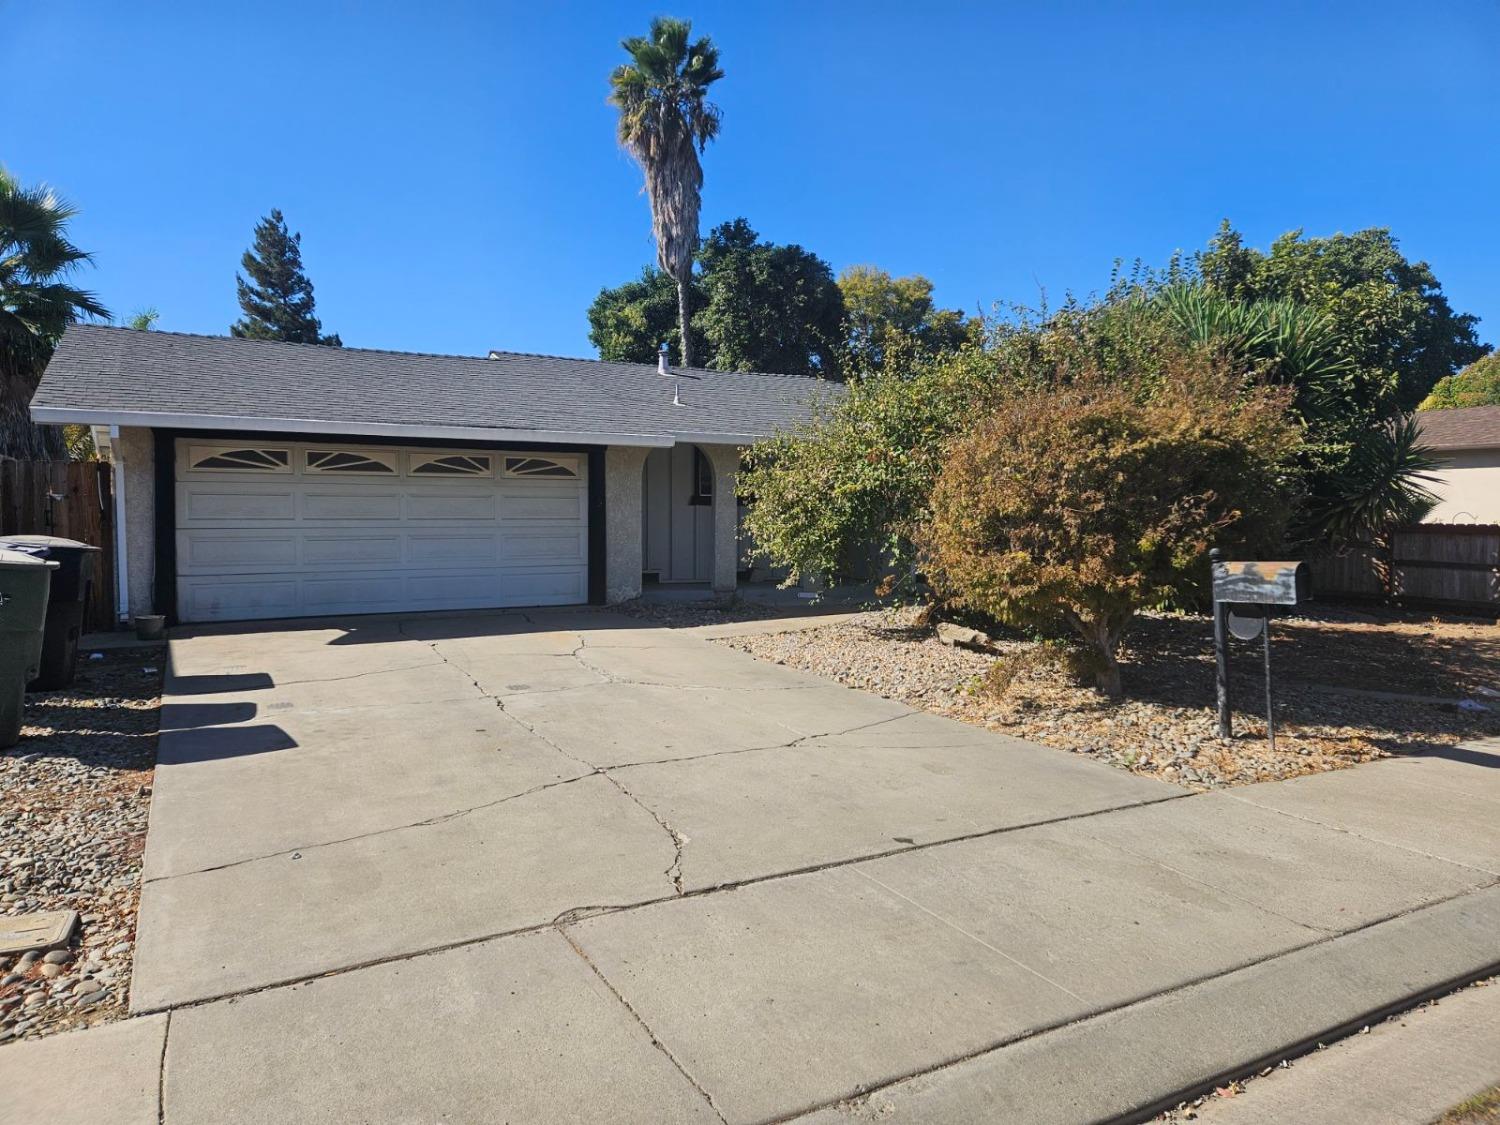 Photo of 543 Lola Ln in Patterson, CA